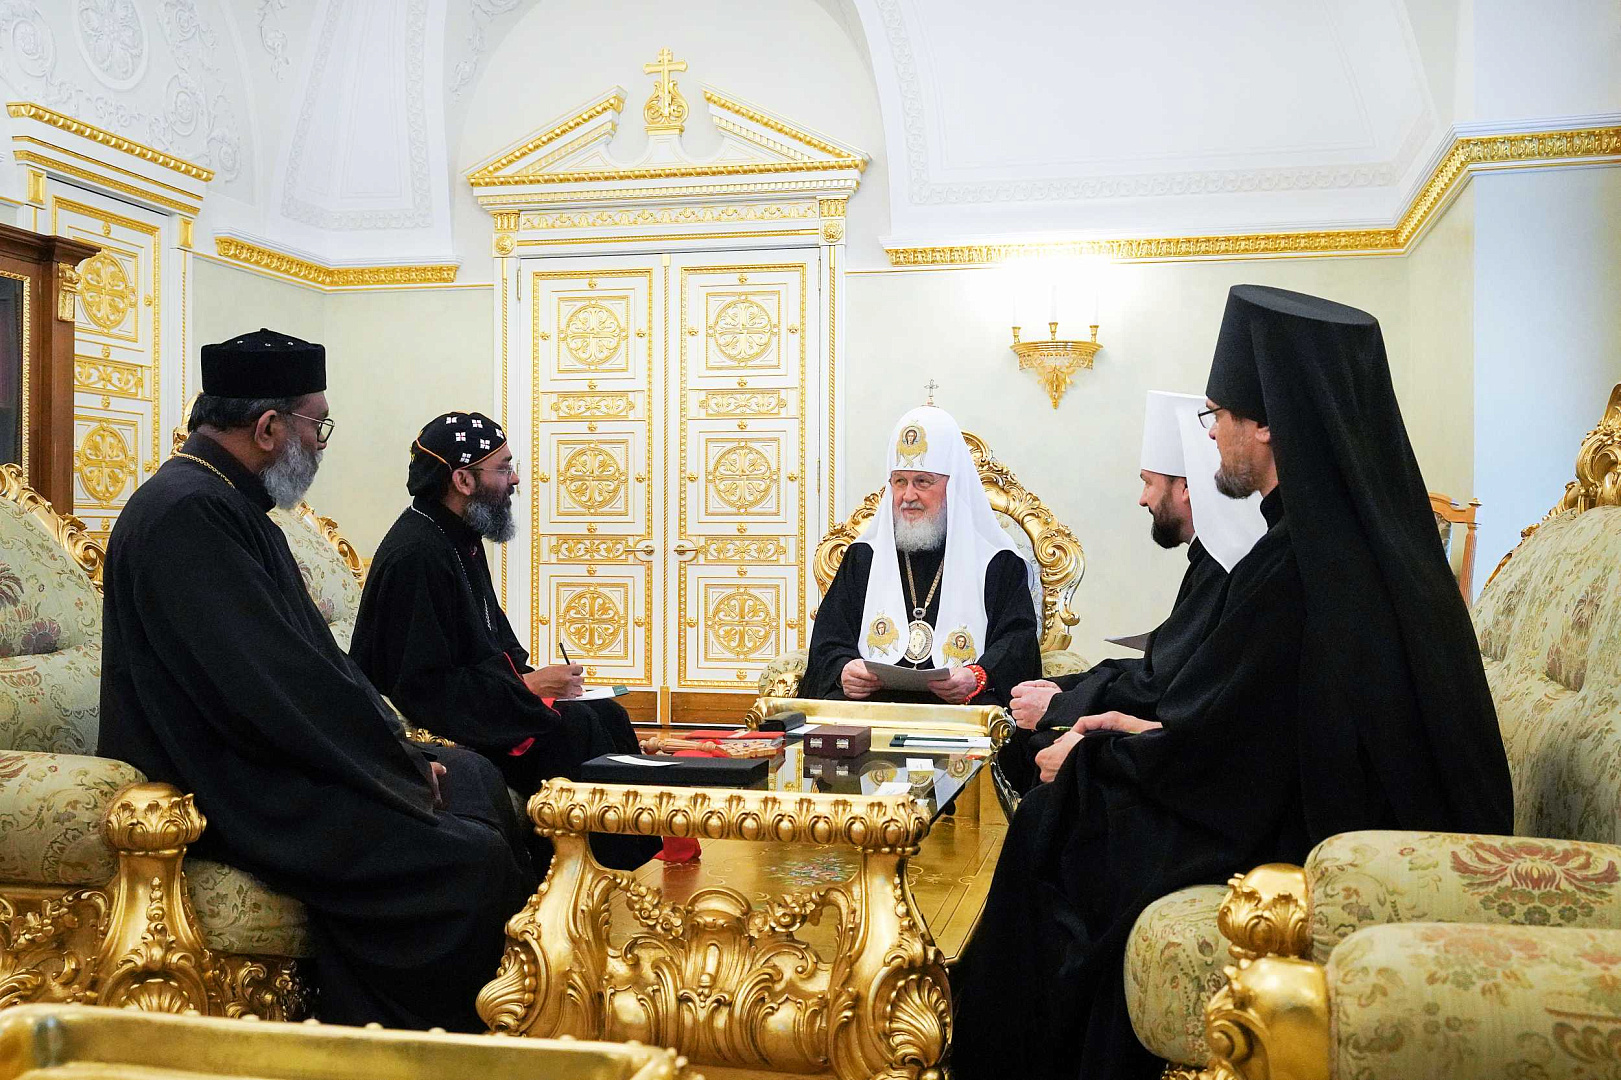 Patriarch Kirill Received Members of the Working Group for Coordinating Bilateral Relations between the Russian Orthodox Church and the Malankara Orthodox Church